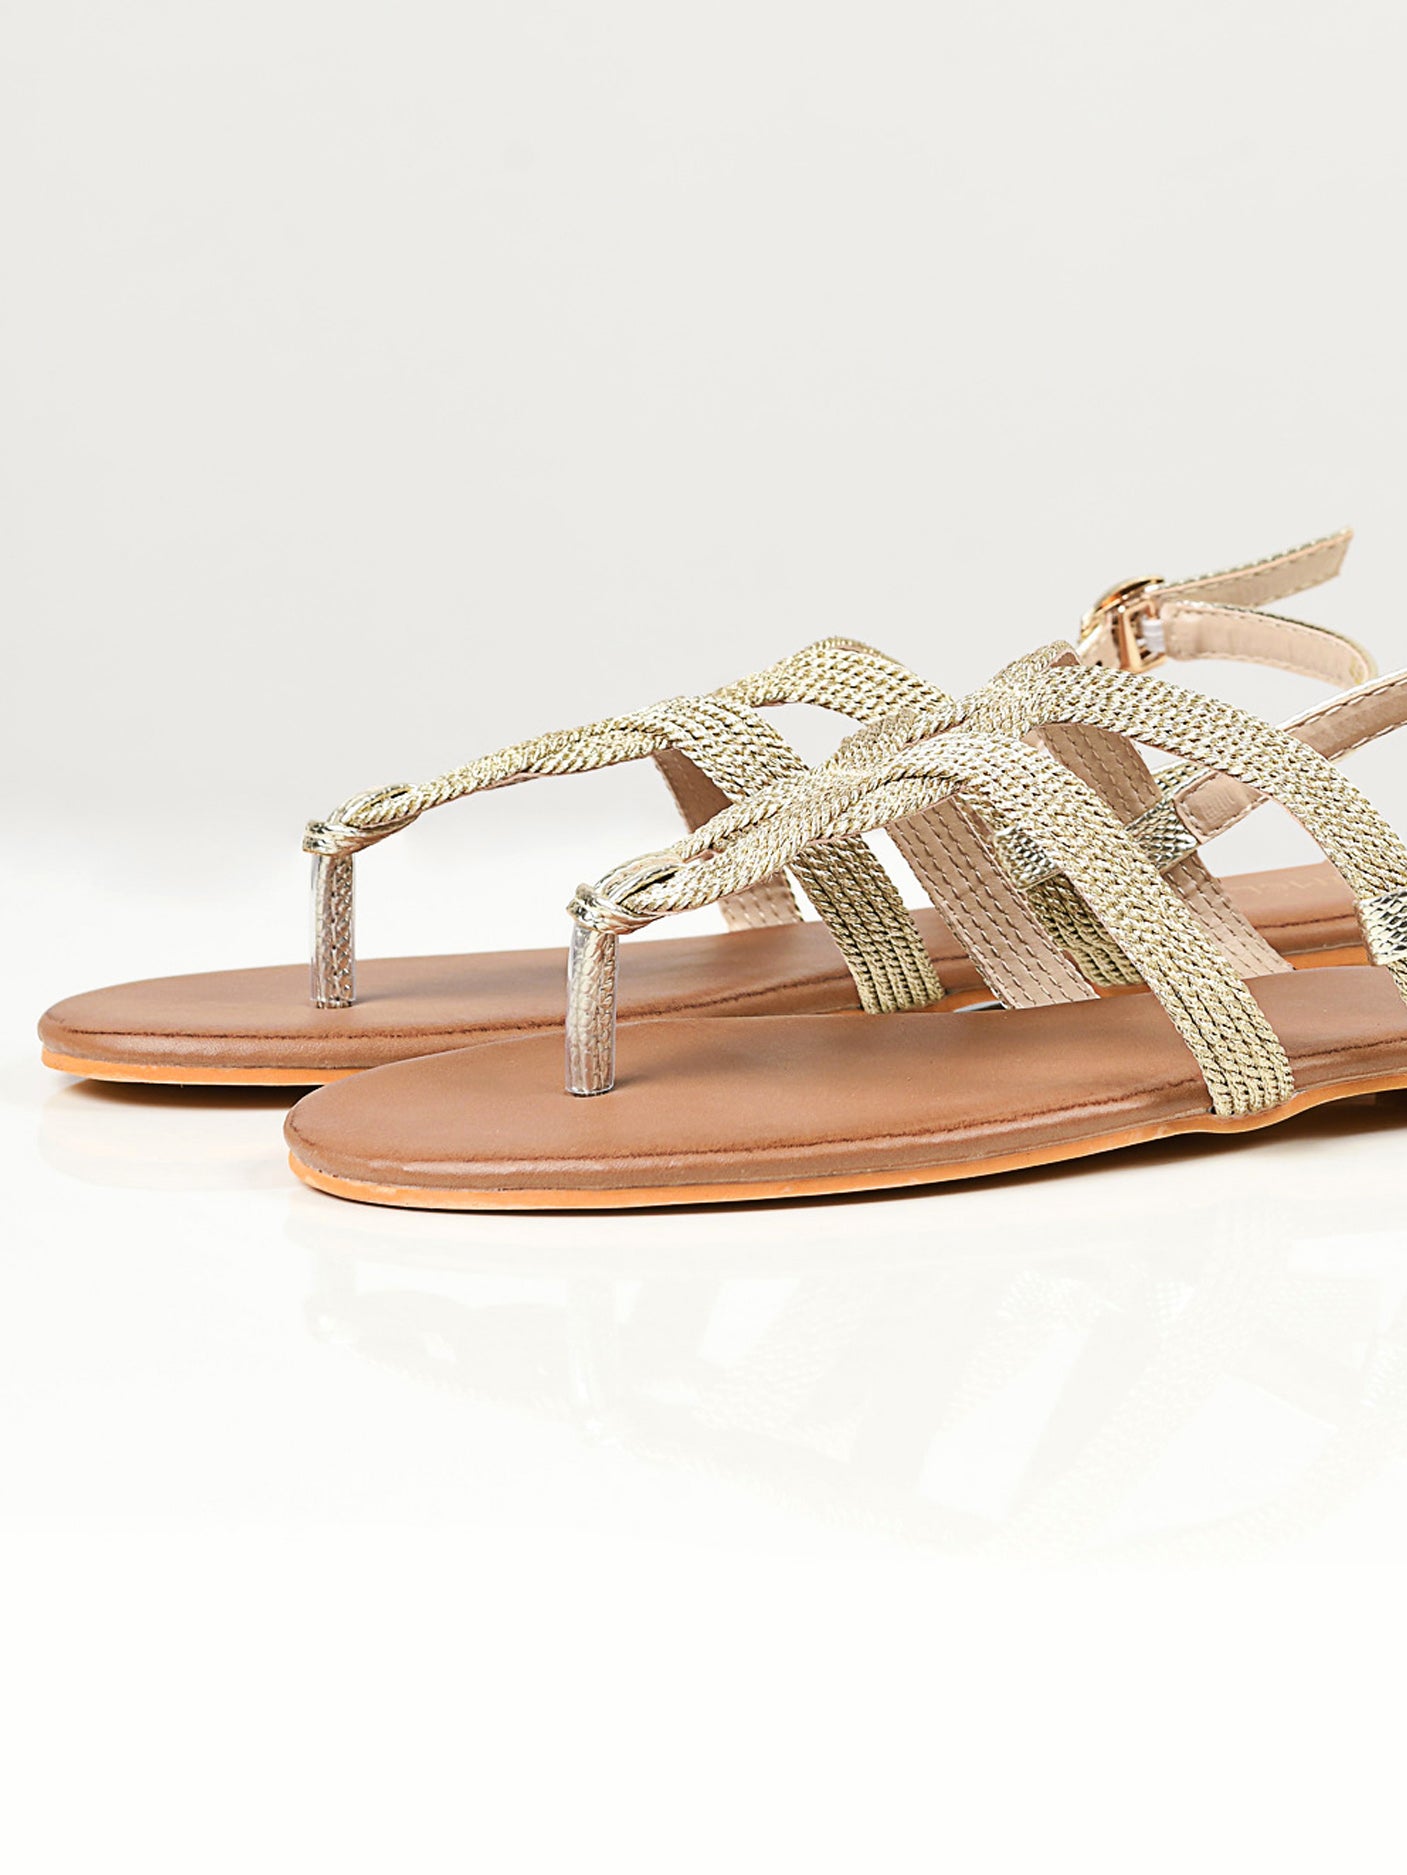 Shimmery Sandals - Gold